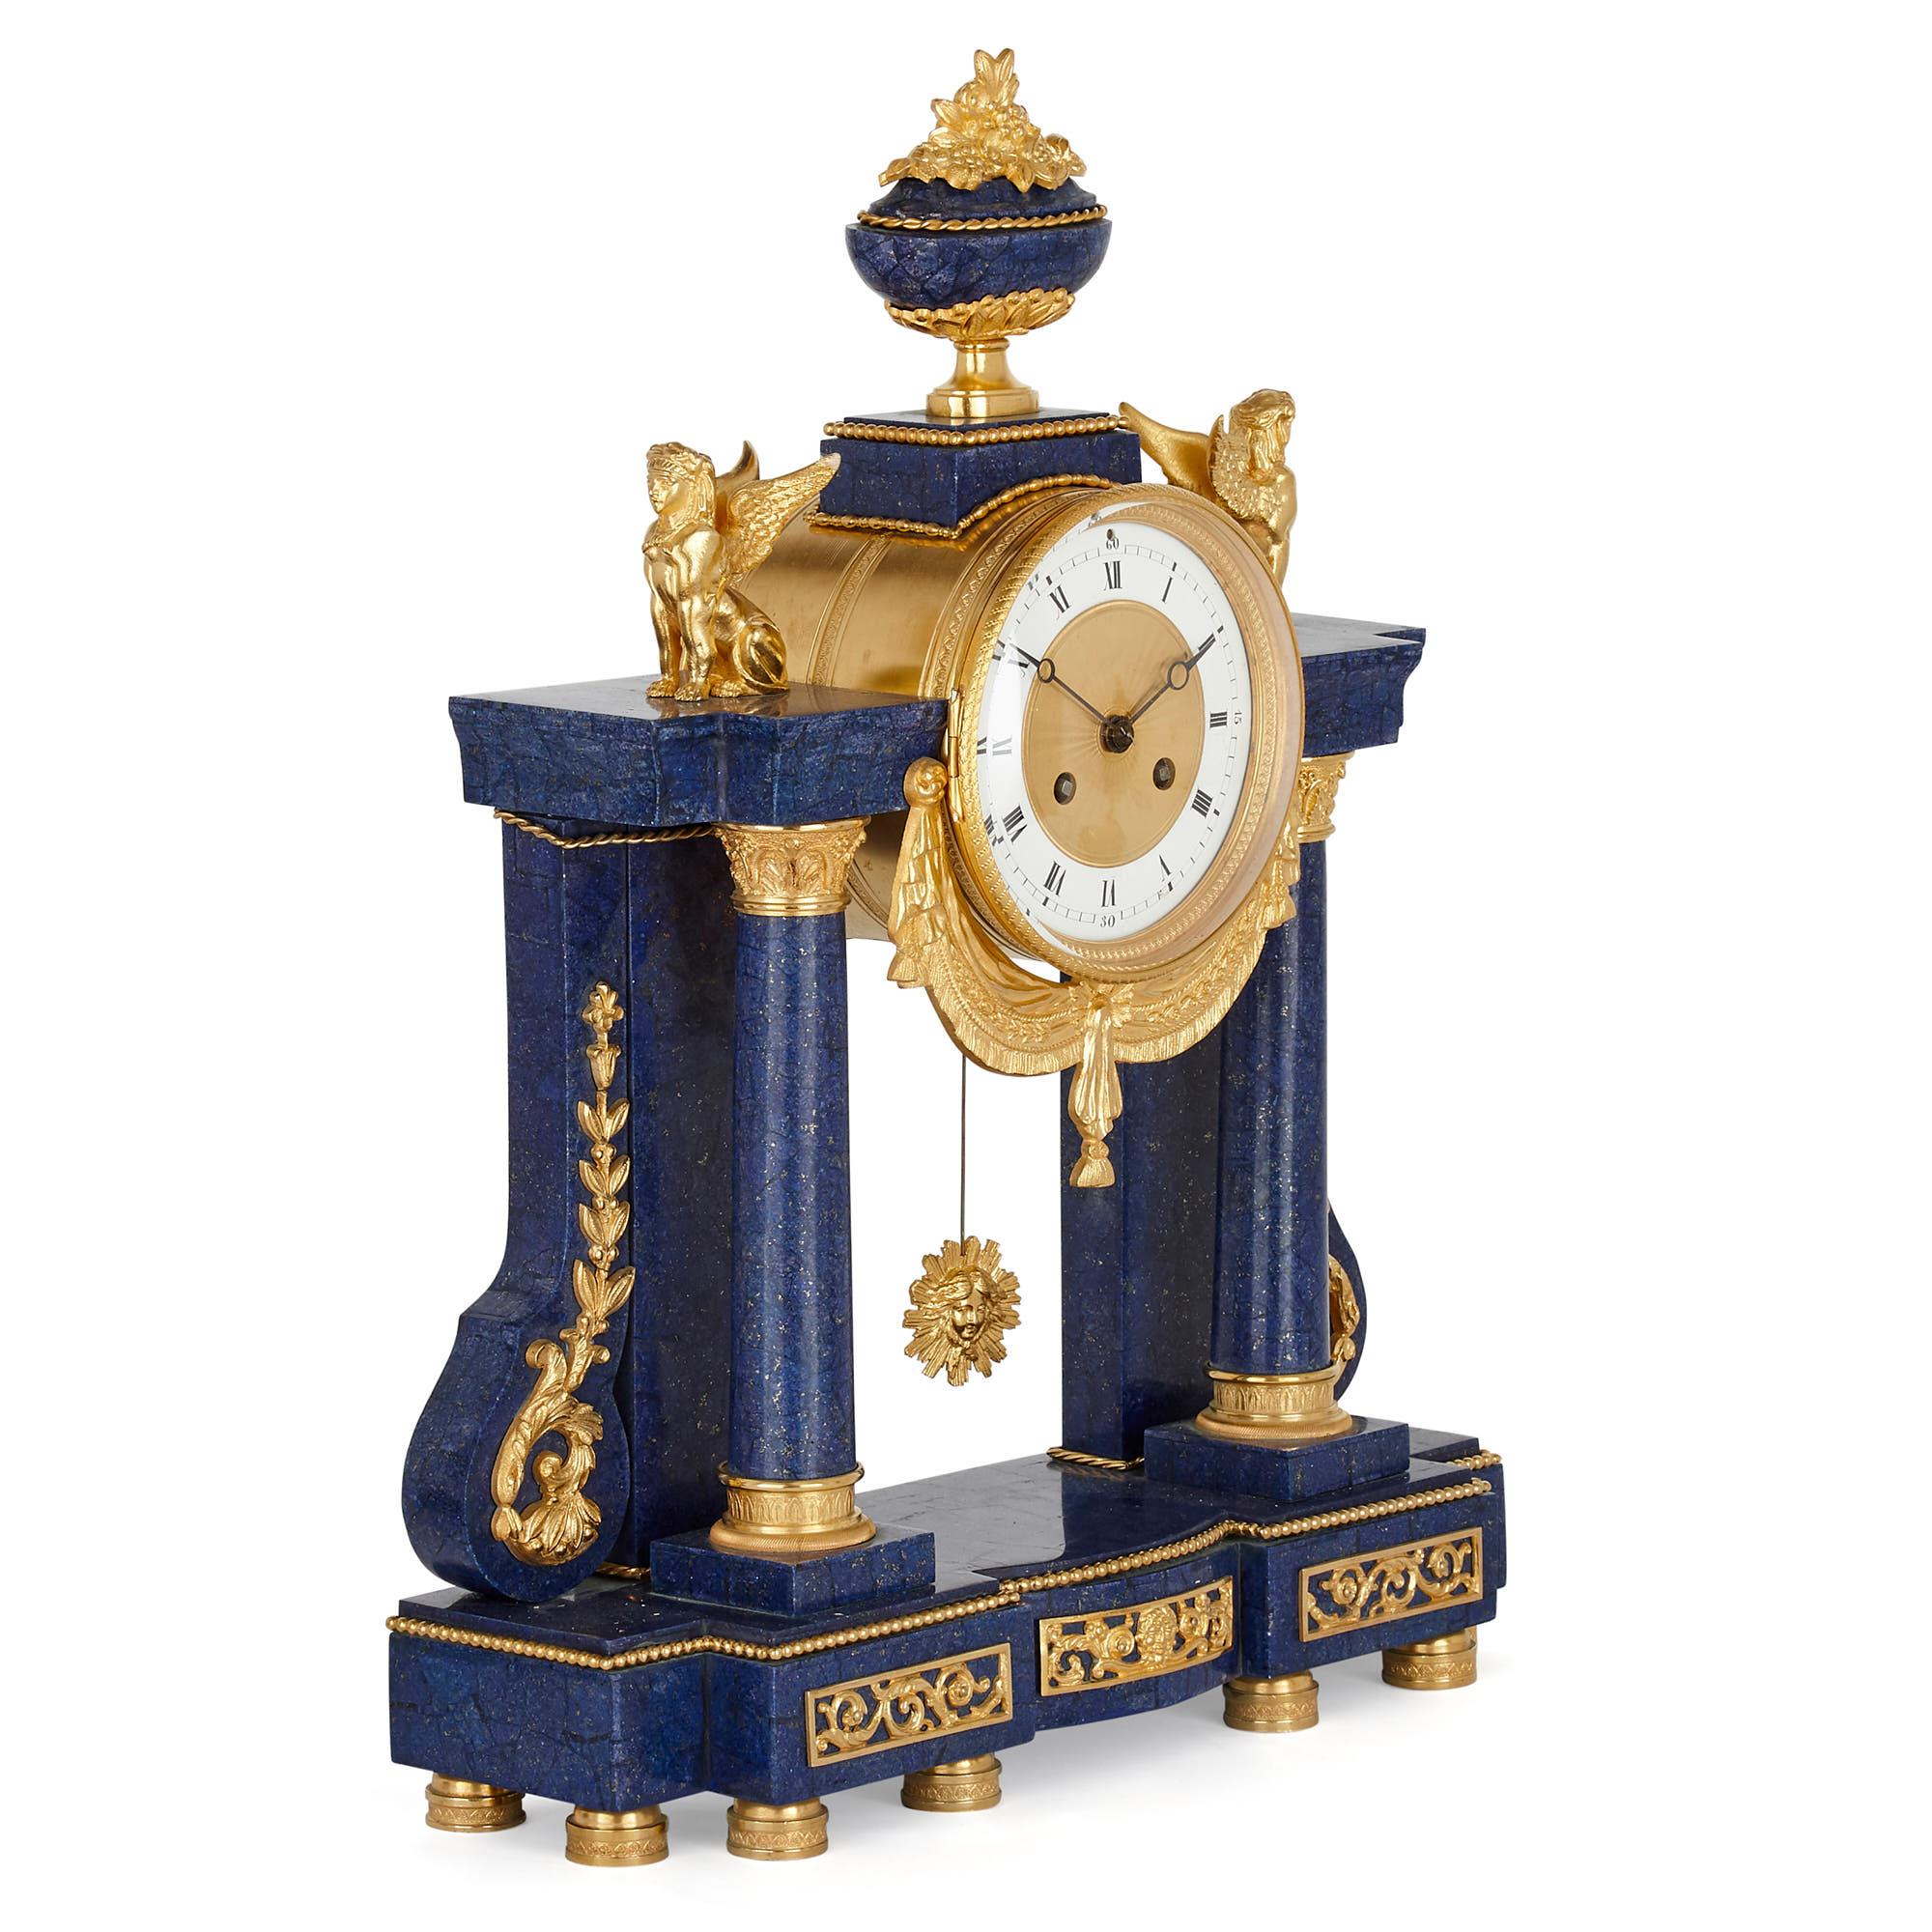 French neoclassical style lapis and gilt bronze clock set
French, late 19th century
Clock height 52cm, width 39cm, depth 15cm 
Vases height 38cm, width 16cm, depth 12cm

This beautiful neoclassical style clock set, comprised of a mantel clock